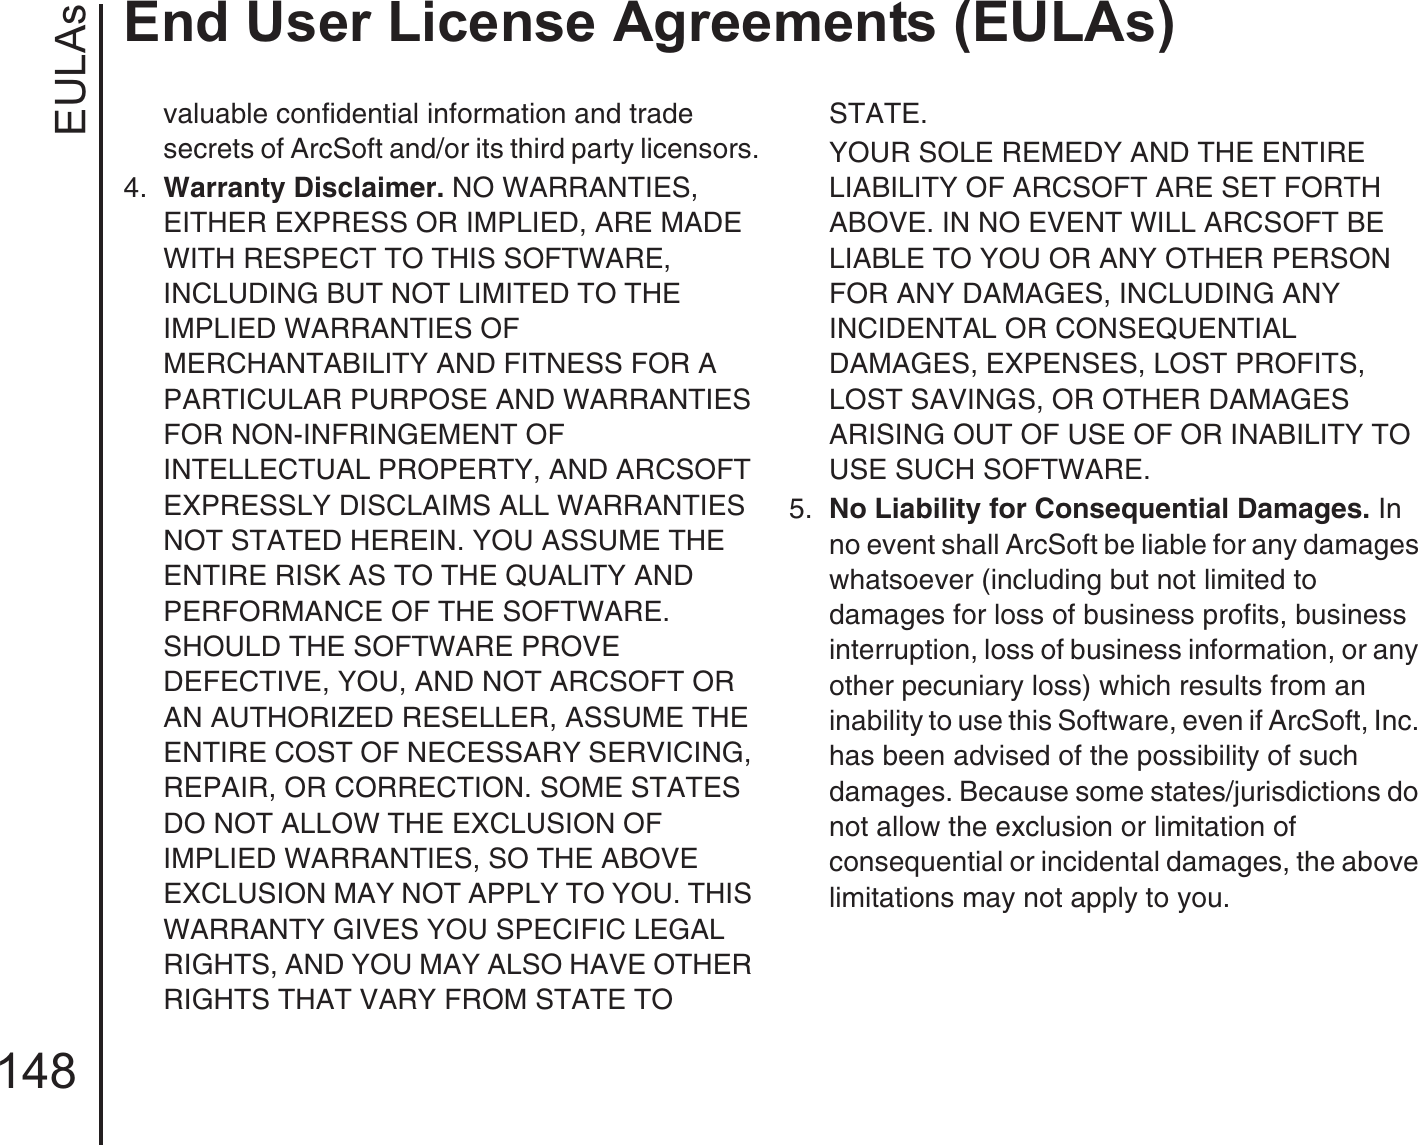 EULAsEnd User License Agreements (EULAs)148valuable confidential information and trade secrets of ArcSoft and/or its third party licensors.4.  Warranty Disclaimer. NO WARRANTIES, EITHER EXPRESS OR IMPLIED, ARE MADE WITH RESPECT TO THIS SOFTWARE, INCLUDING BUT NOT LIMITED TO THE IMPLIED WARRANTIES OF MERCHANTABILITY AND FITNESS FOR A PARTICULAR PURPOSE AND WARRANTIES FOR NON-INFRINGEMENT OF INTELLECTUAL PROPERTY, AND ARCSOFT EXPRESSLY DISCLAIMS ALL WARRANTIES NOT STATED HEREIN. YOU ASSUME THE ENTIRE RISK AS TO THE QUALITY AND PERFORMANCE OF THE SOFTWARE. SHOULD THE SOFTWARE PROVE DEFECTIVE, YOU, AND NOT ARCSOFT OR AN AUTHORIZED RESELLER, ASSUME THE ENTIRE COST OF NECESSARY SERVICING, REPAIR, OR CORRECTION. SOME STATES DO NOT ALLOW THE EXCLUSION OF IMPLIED WARRANTIES, SO THE ABOVE EXCLUSION MAY NOT APPLY TO YOU. THIS WARRANTY GIVES YOU SPECIFIC LEGAL RIGHTS, AND YOU MAY ALSO HAVE OTHER RIGHTS THAT VARY FROM STATE TO STATE.YOUR SOLE REMEDY AND THE ENTIRE LIABILITY OF ARCSOFT ARE SET FORTH ABOVE. IN NO EVENT WILL ARCSOFT BE LIABLE TO YOU OR ANY OTHER PERSON FOR ANY DAMAGES, INCLUDING ANY INCIDENTAL OR CONSEQUENTIAL DAMAGES, EXPENSES, LOST PROFITS, LOST SAVINGS, OR OTHER DAMAGES ARISING OUT OF USE OF OR INABILITY TO USE SUCH SOFTWARE.5.  No Liability for Consequential Damages. In no event shall ArcSoft be liable for any damages whatsoever (including but not limited to damages for loss of business profits, business interruption, loss of business information, or any other pecuniary loss) which results from an inability to use this Software, even if ArcSoft, Inc. has been advised of the possibility of such damages. Because some states/jurisdictions do not allow the exclusion or limitation of consequential or incidental damages, the above limitations may not apply to you.